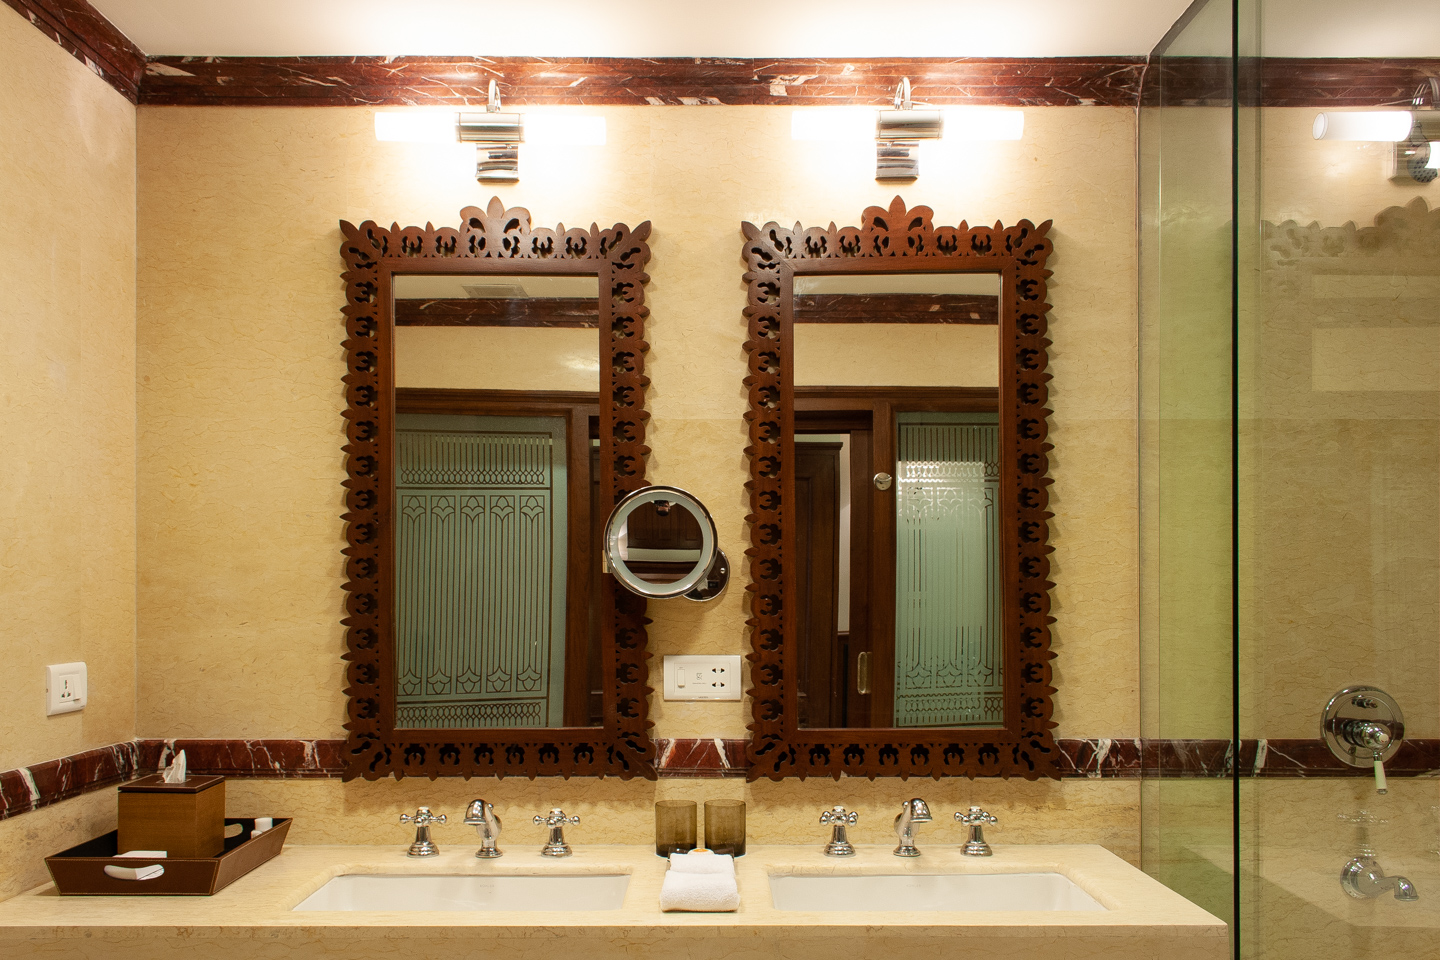 The marble walls of the bathroom are highlighted with trim of carved red marble. The tub has a sliding glass screen.